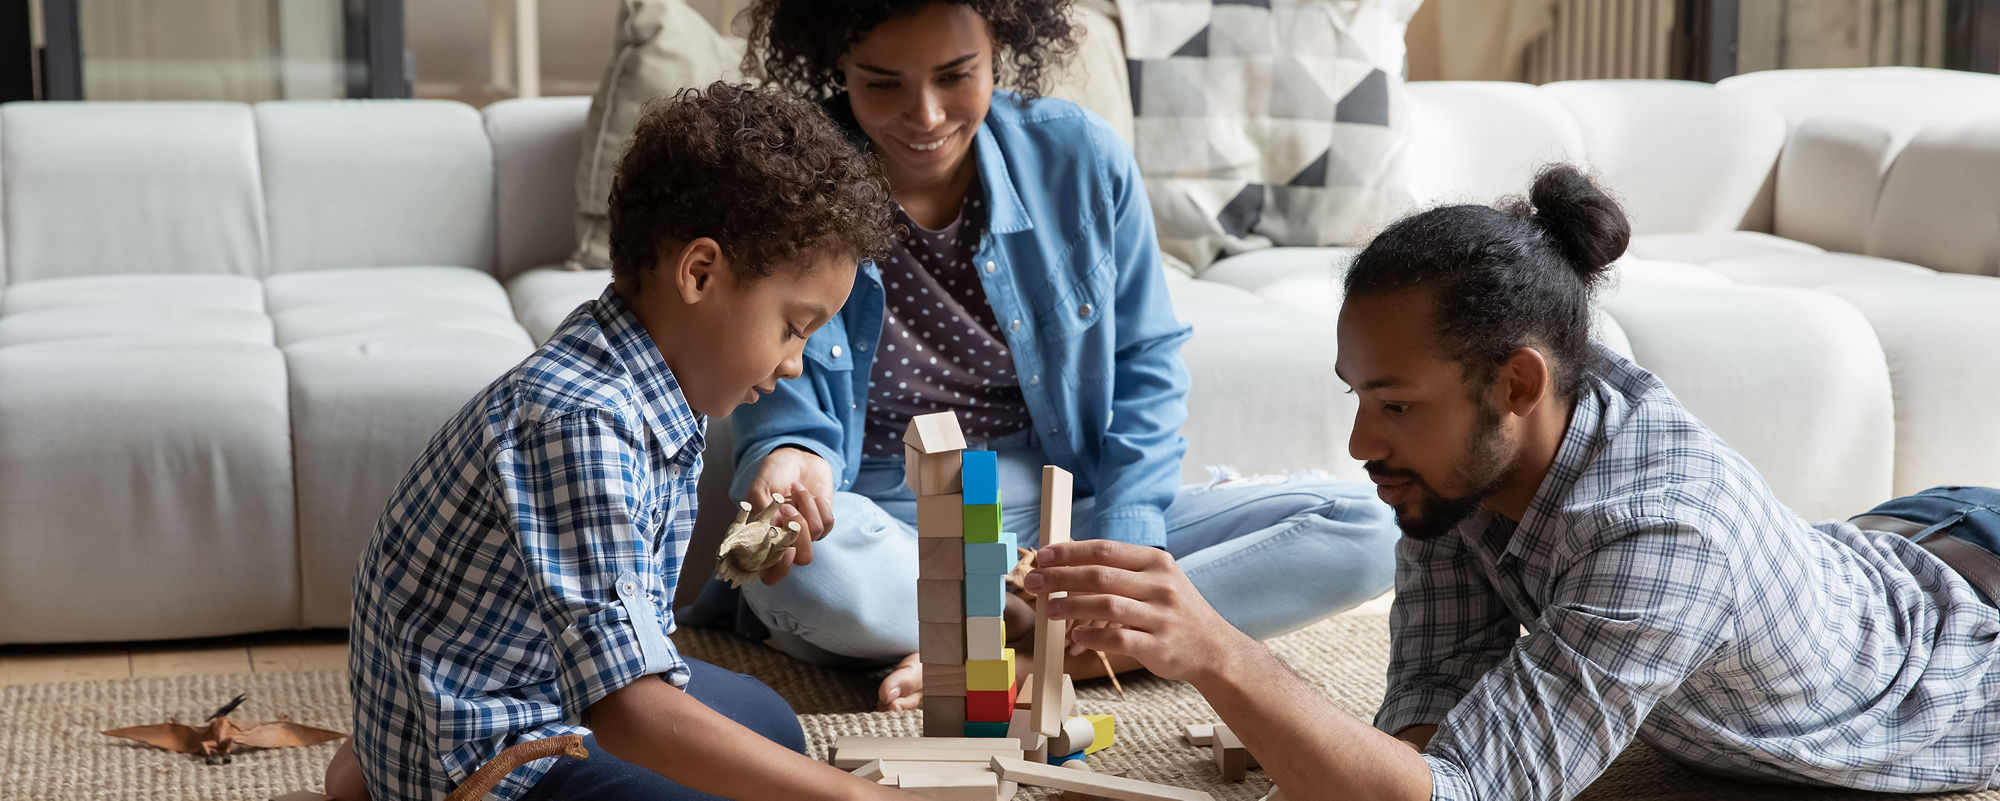 Loving African American parents playing with wooden toys in their living room with their young son.